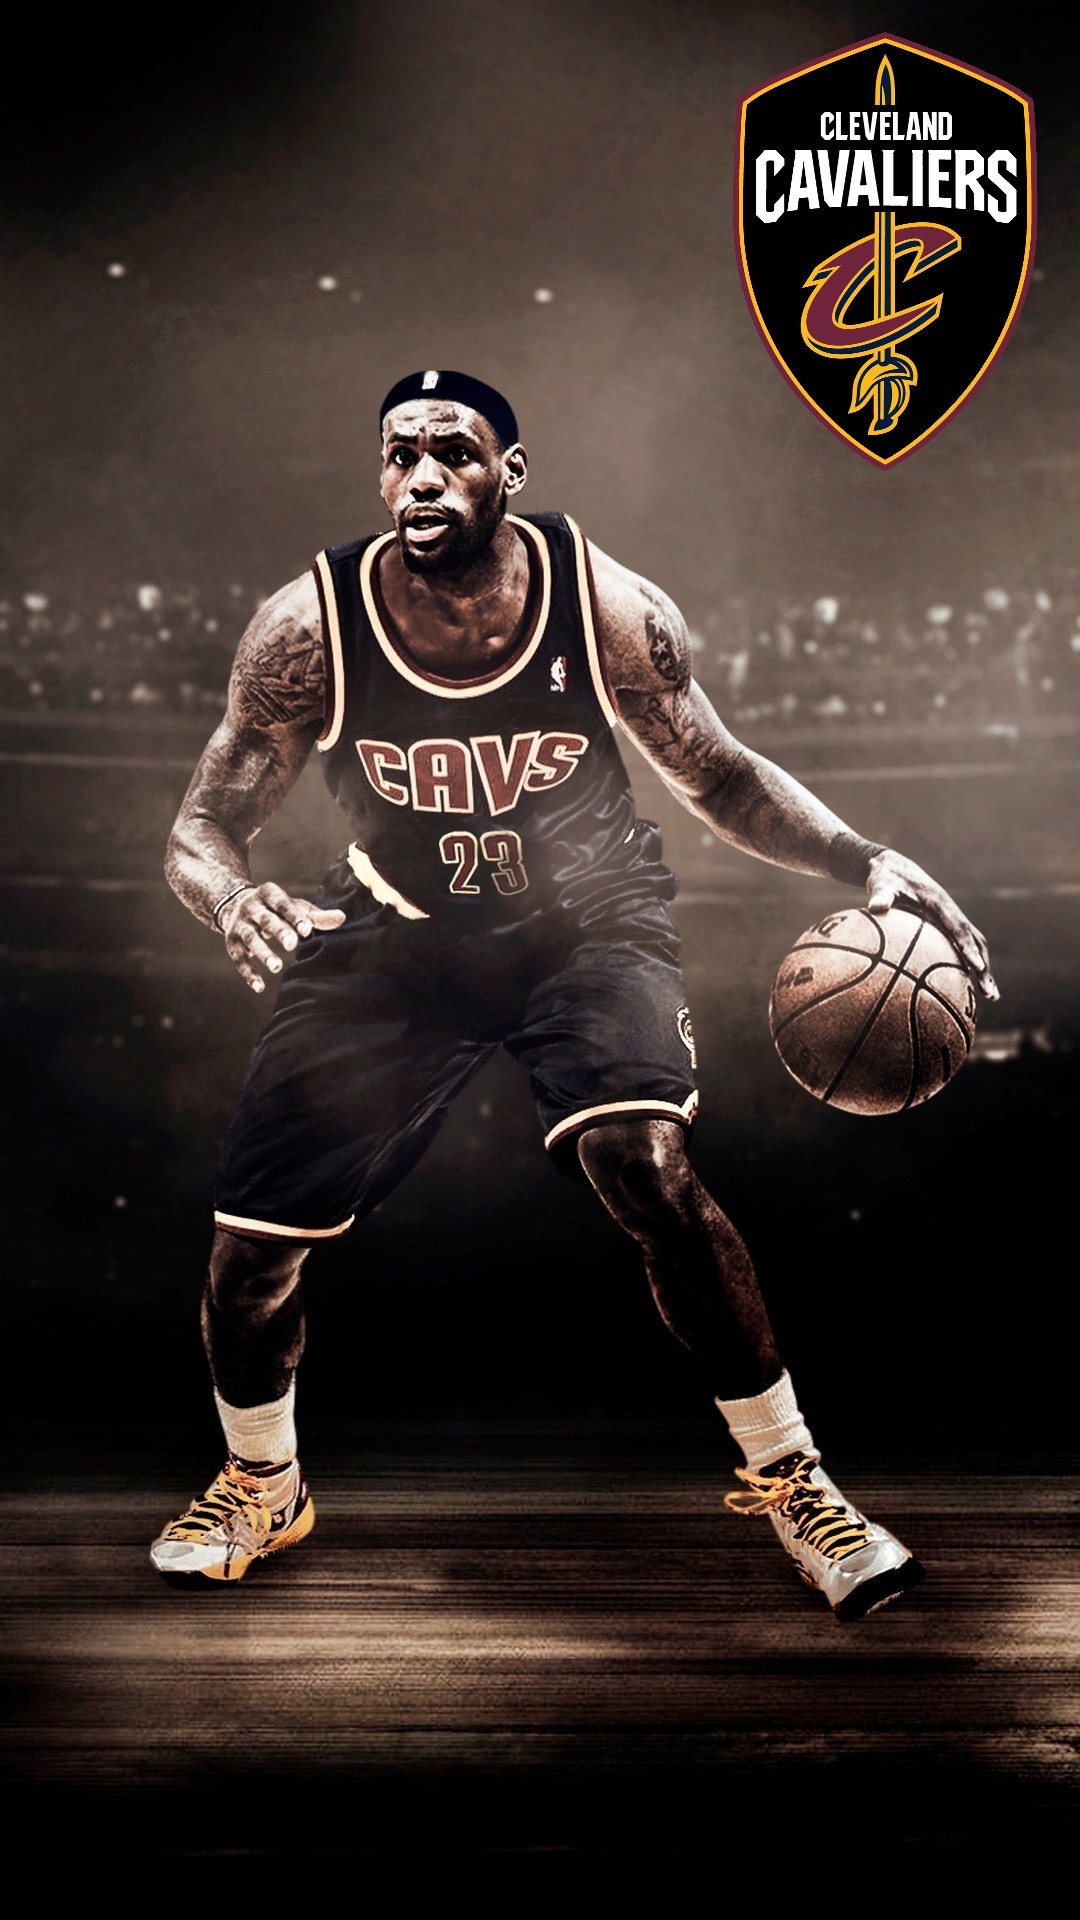 1080x1920 Wallpaper Cleveland Cavaliers Nba Mobile 2018 Basketball Wallpapers